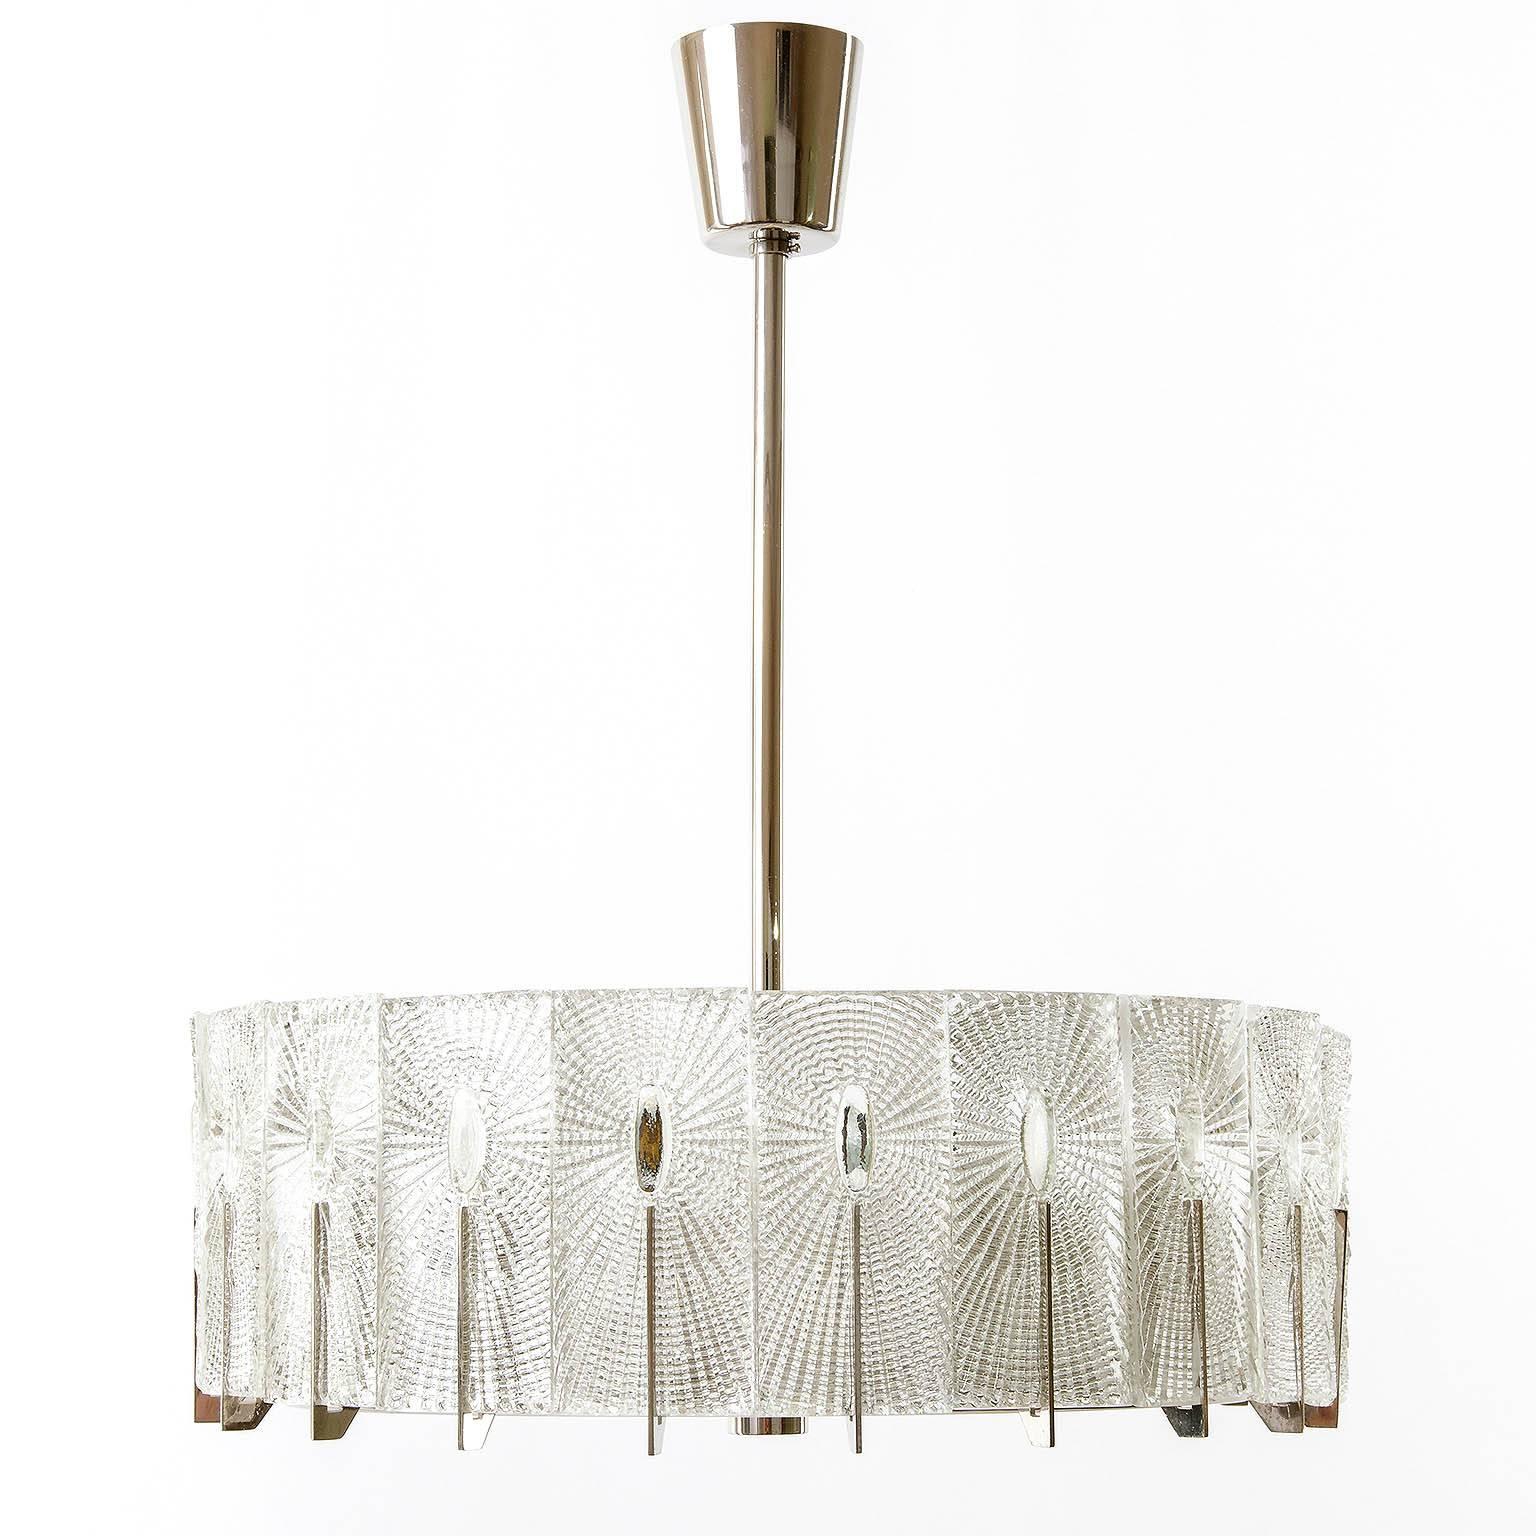 Two rare and exceptional textured glass and chrome and nickel light fixtures by Rupert Nikoll, Austria, manufactured in Mid-Century, circa 1950. The glass structure is in the style of the lights of J.T. Kalmar.

The lamps can be used as chandelier